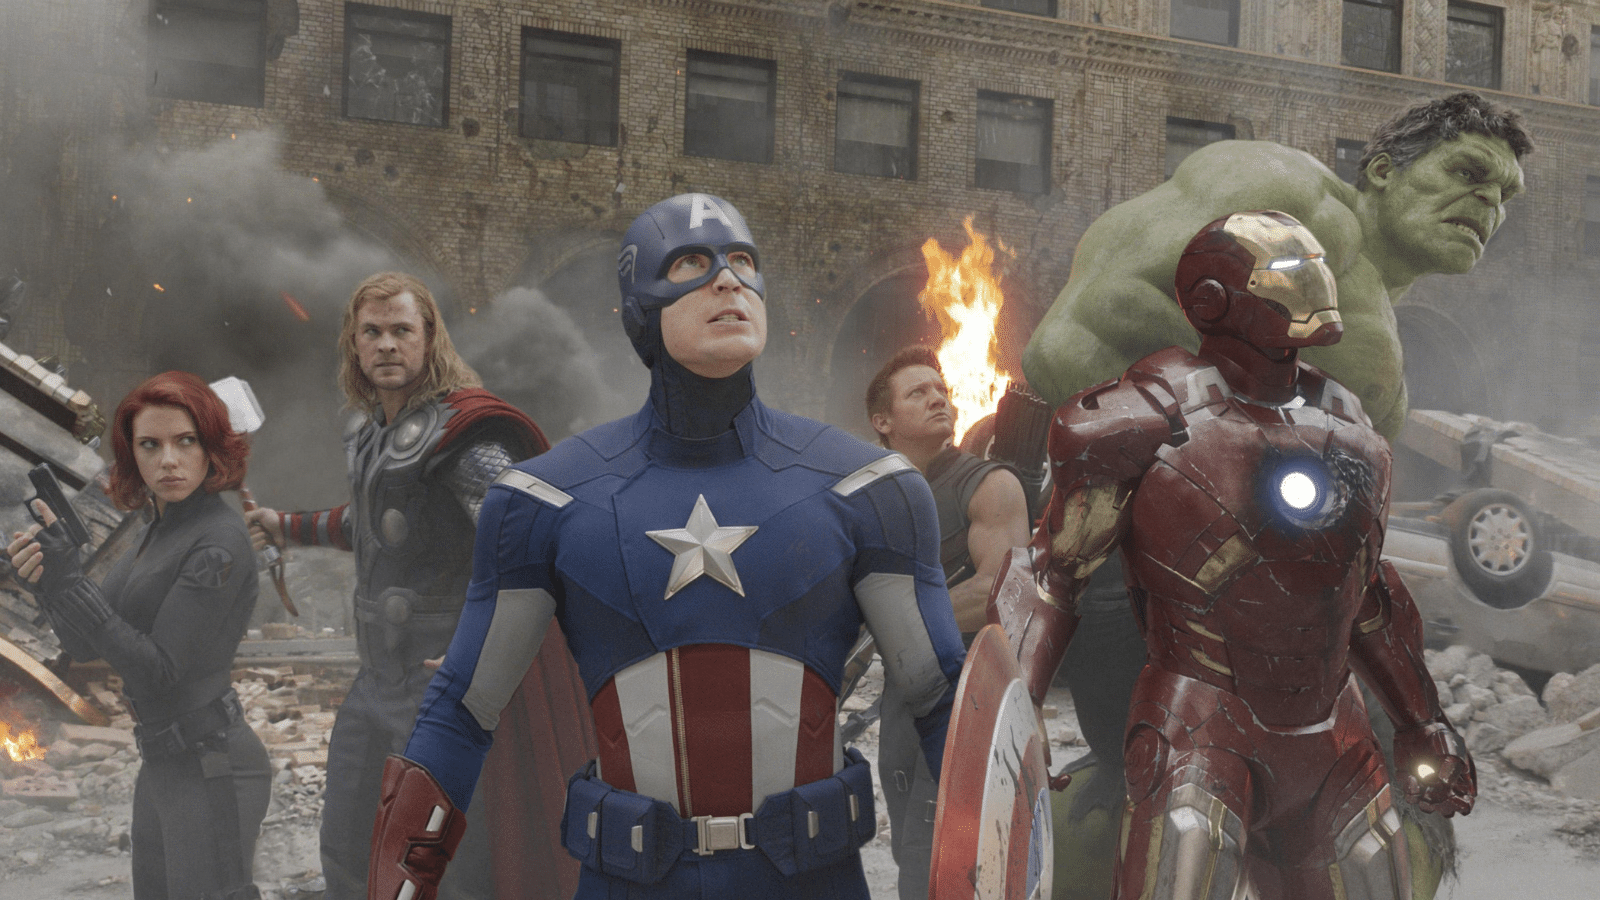 AI offers it's own take on 'The Avengers'